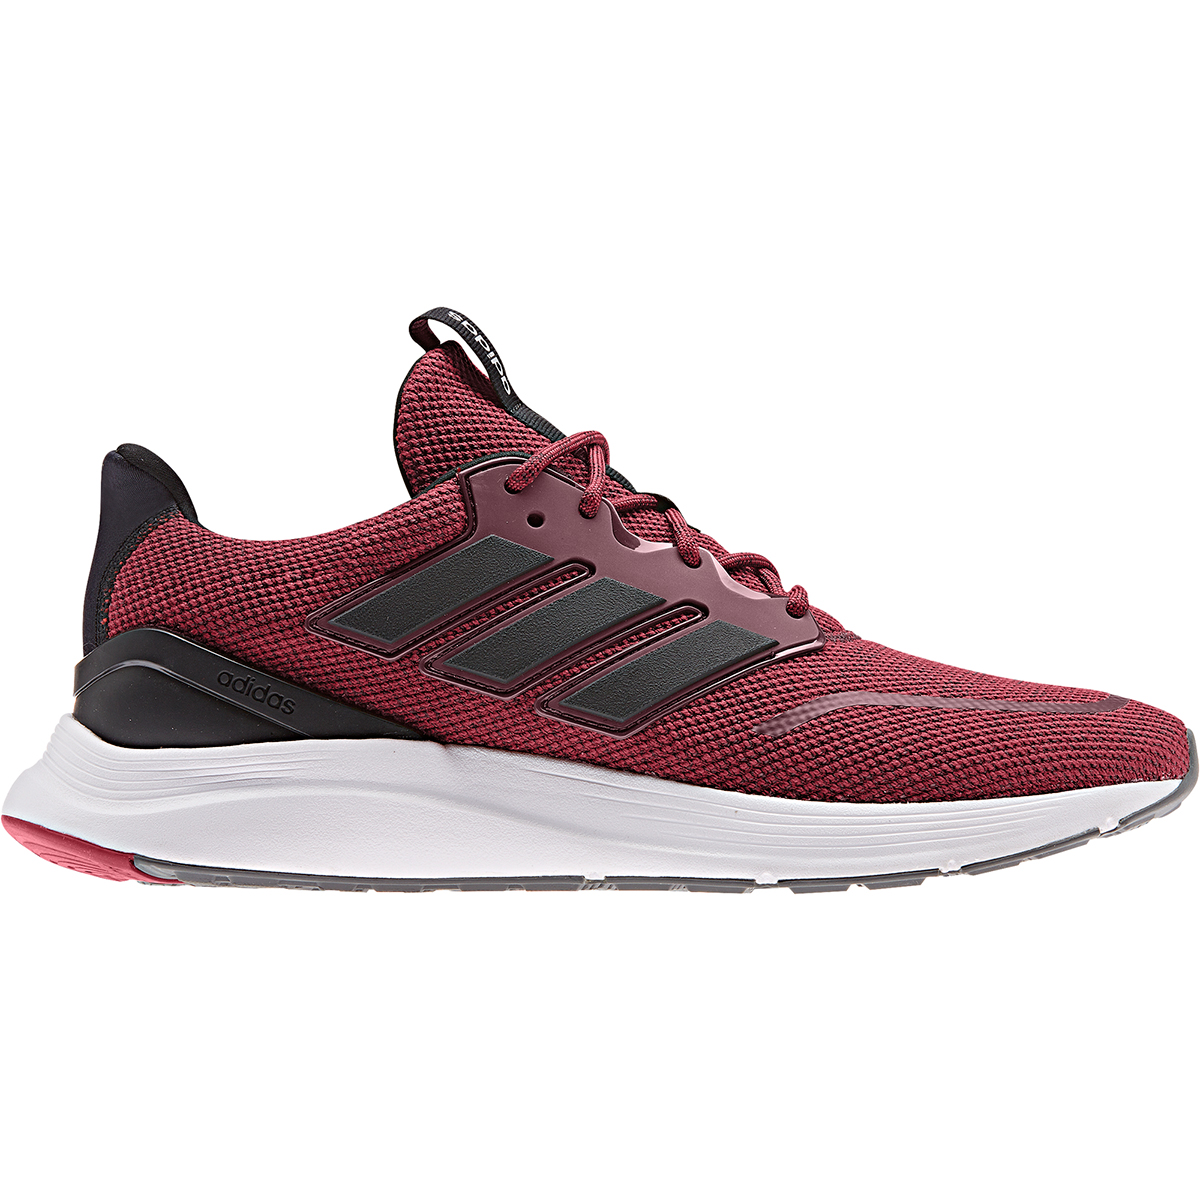 Adidas Men's Energy Falcon Running Shoes - Red, 8